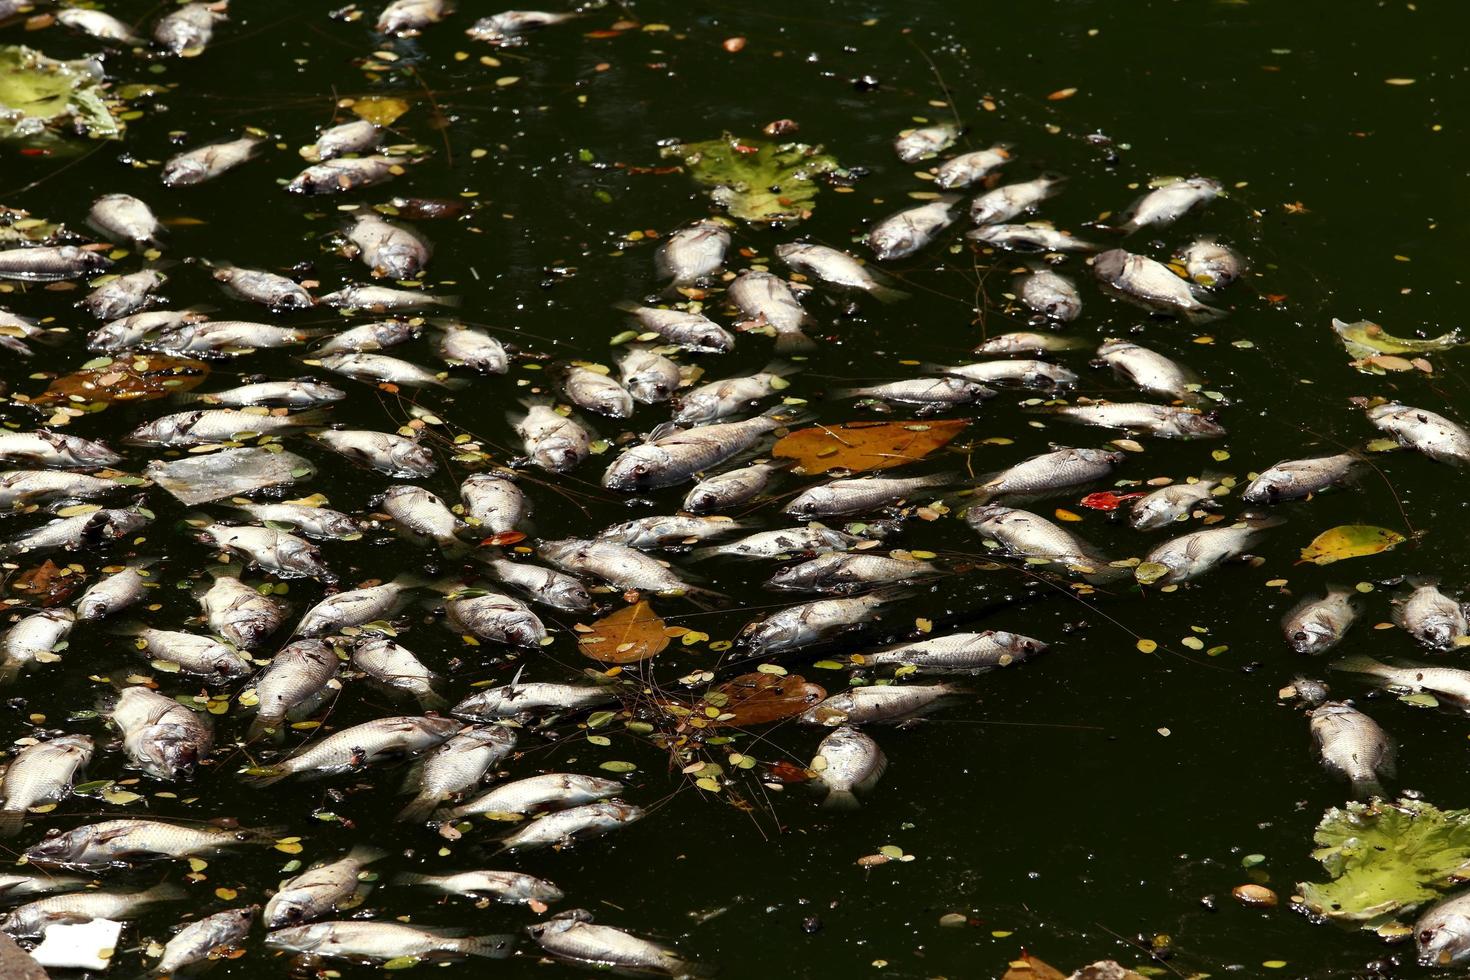 dead fish floated in the dark water, water pollution photo